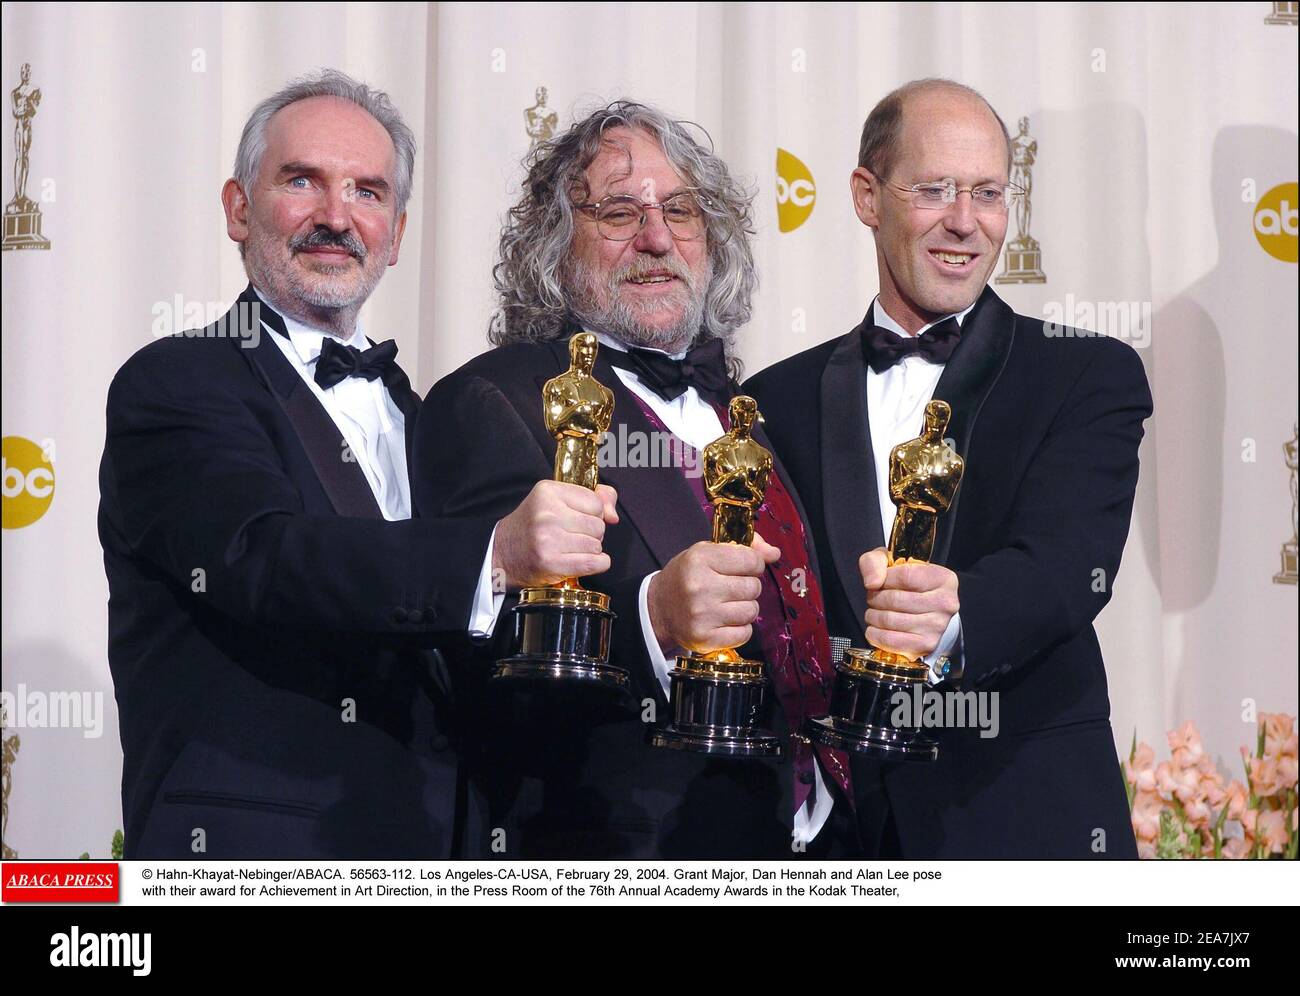 Grant Major, Dan Hennah and Alan Lee pose with their award for Achievement in Art Direction, in the Press Room of the 76th Annual Academy Awards in the Kodak Theater, Los Angeles, CA. February 29, 2004 (Pictured : Grant Major, Dan Hennah, Alan Lee) Photo by Hahn-Khayat-Nebinger/ABACA Stock Photo